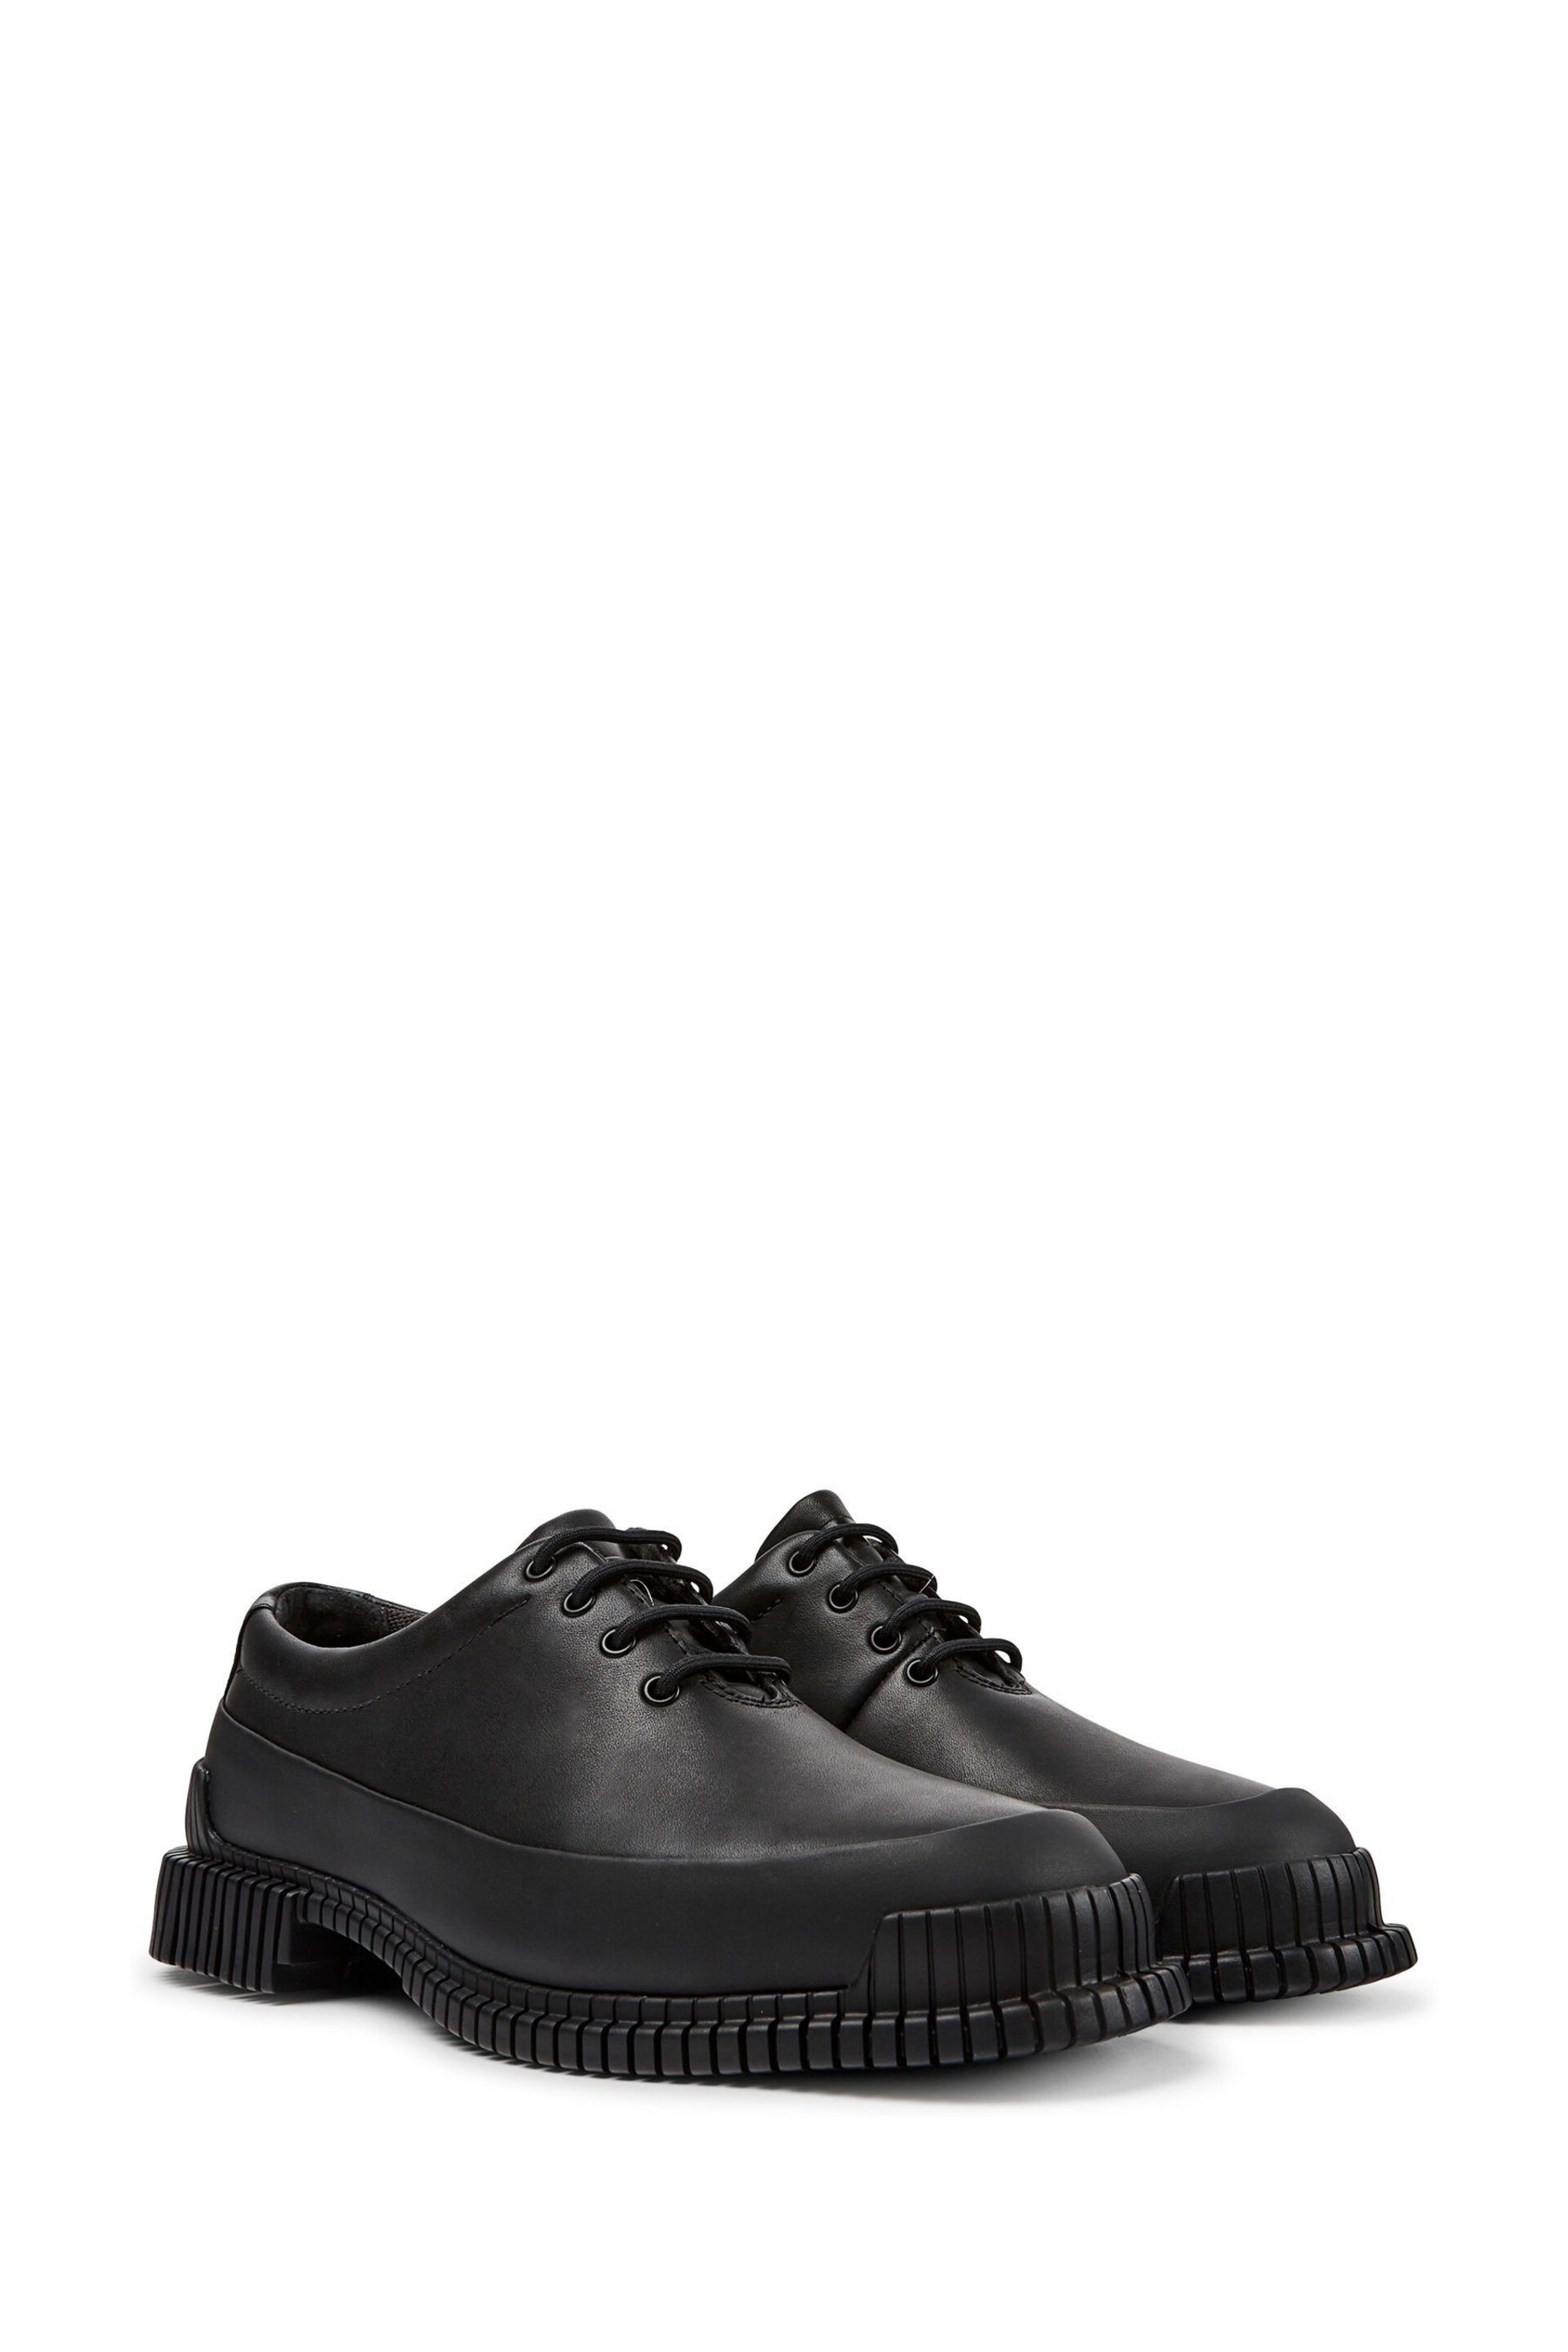 Pix Black Leather Lace Up Women's Shoes - Image 2 of 5